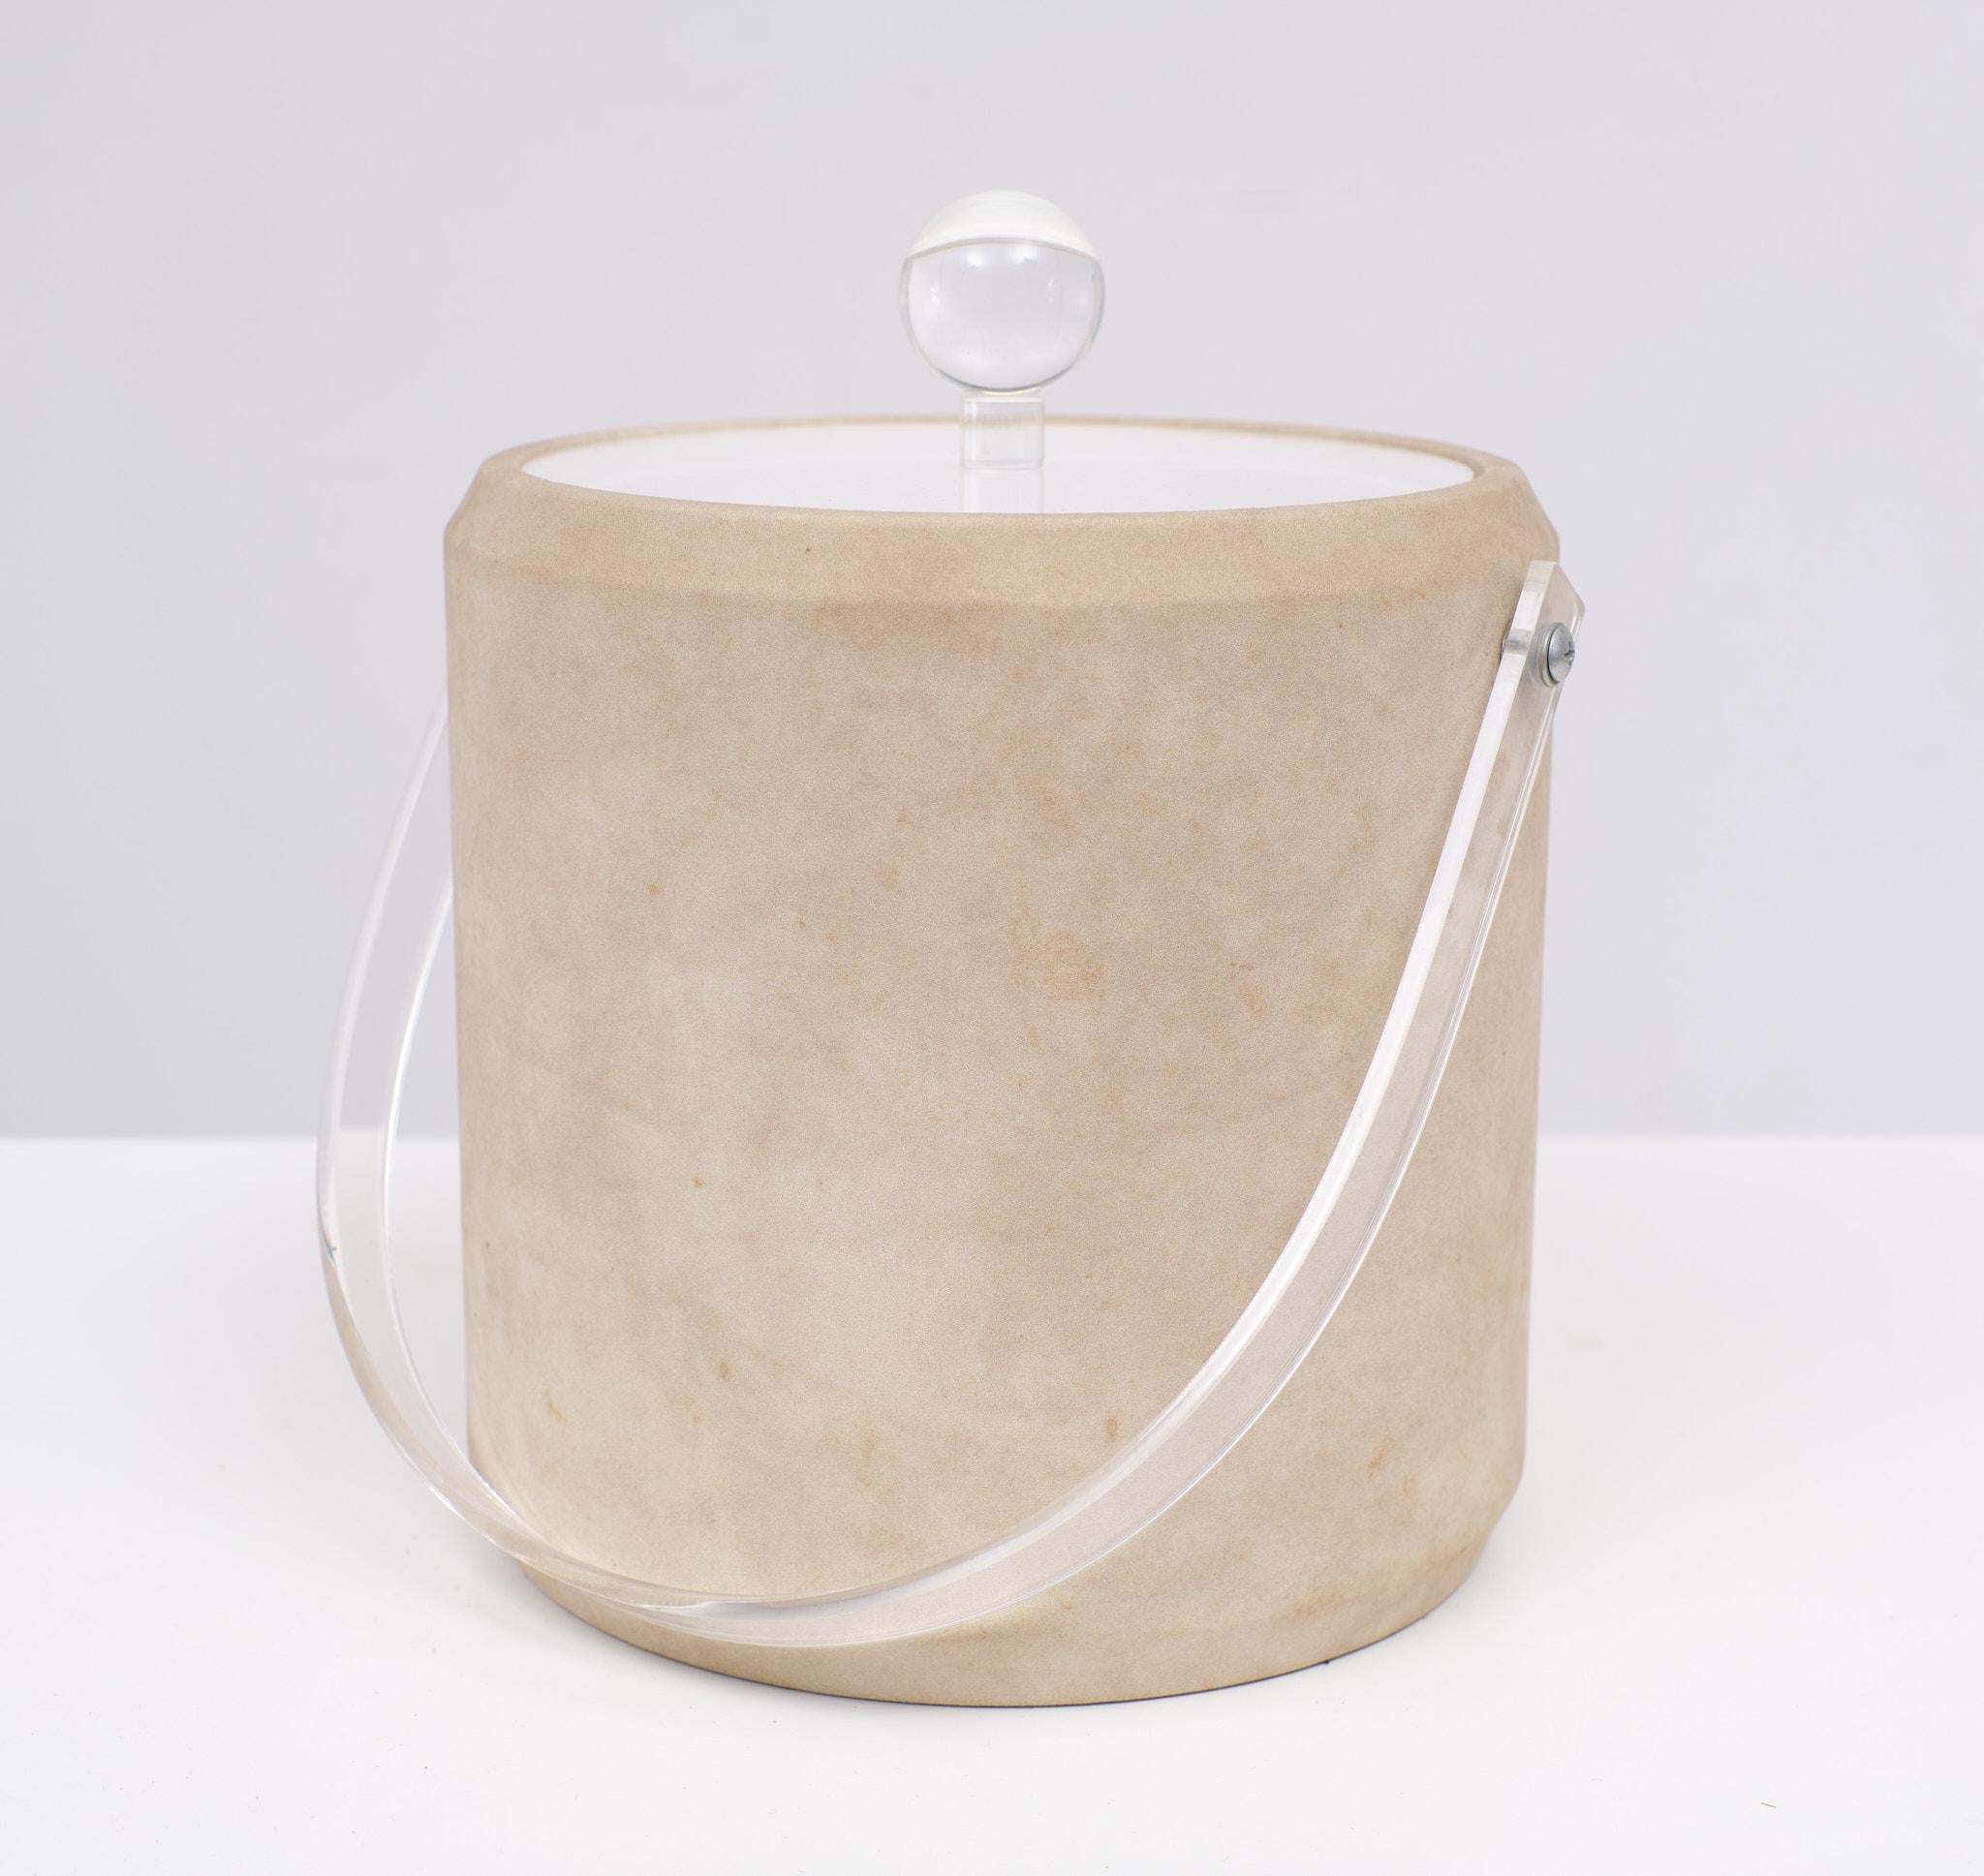 Very nice ice bucket. Looks like stone or Suede. Lucite lid and handle.
Made by the Bucket Brigade USA 1970s.